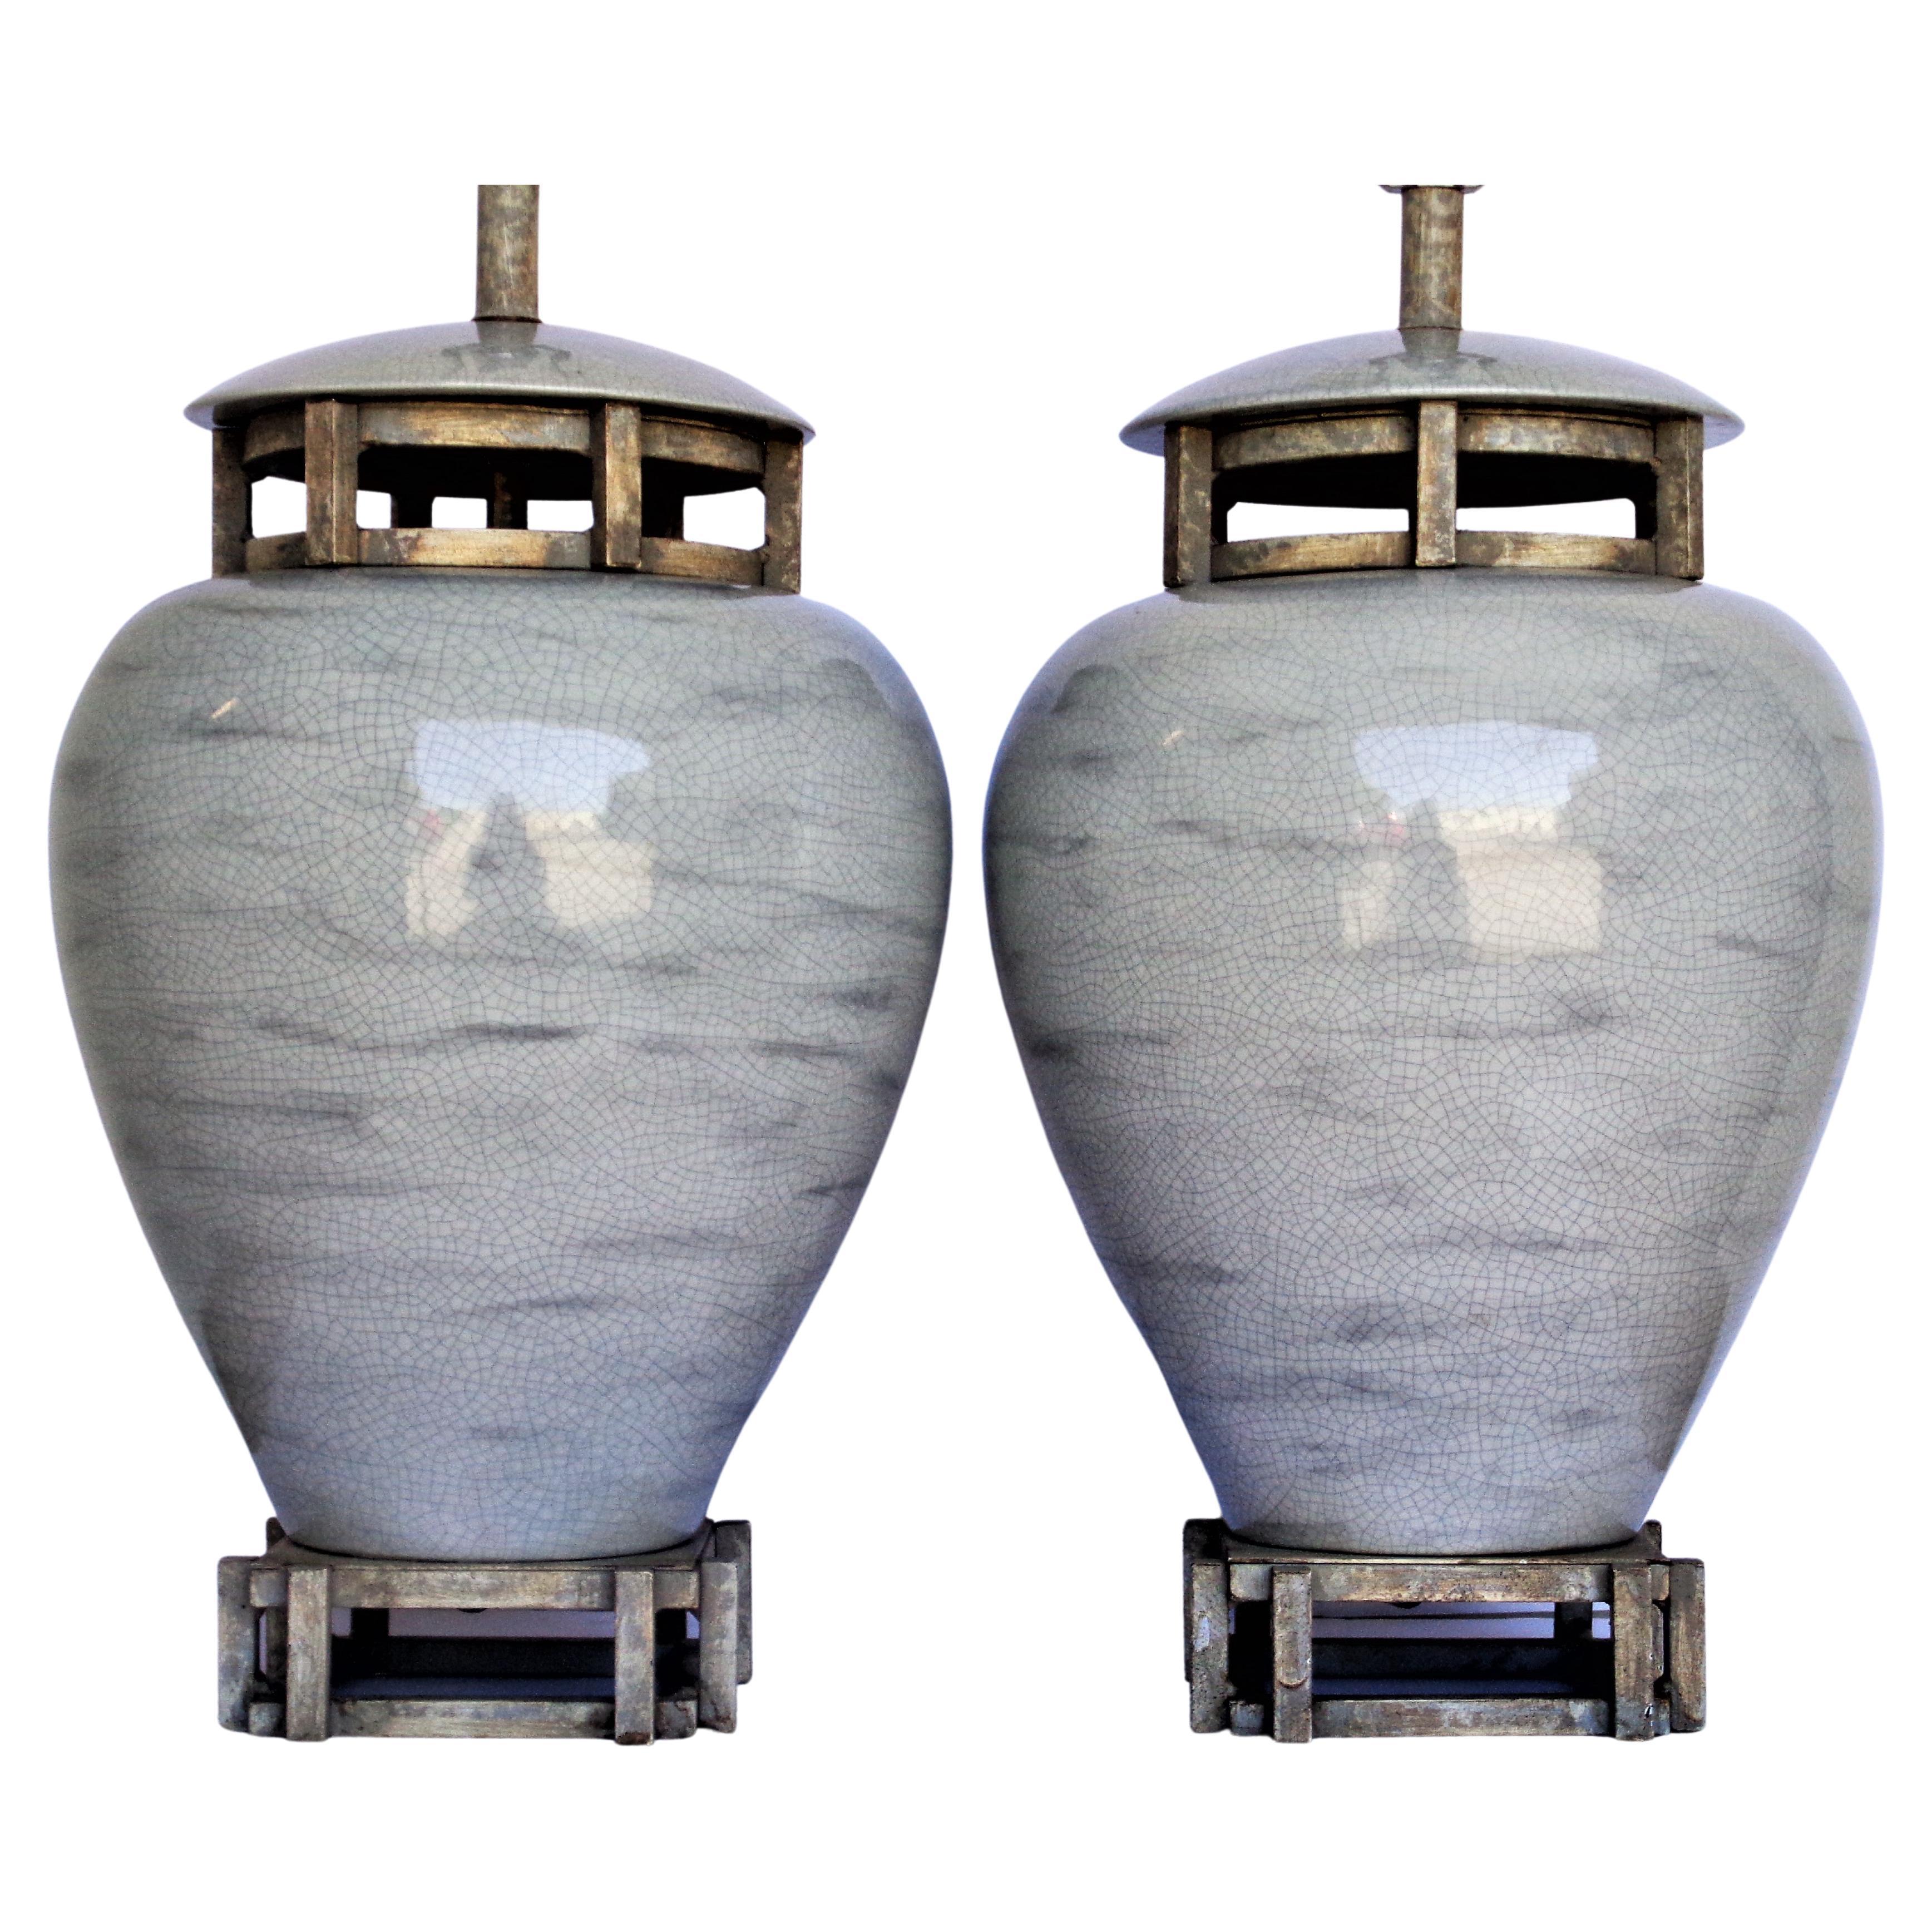  Pair of large scale neoclassical modern crackle glazed porcelain ceramic table lamps with attached architectural silver leaf wood bases and inset tops. Great quality. Circa 1970's. Look at all pictures and read condition report in comment section.